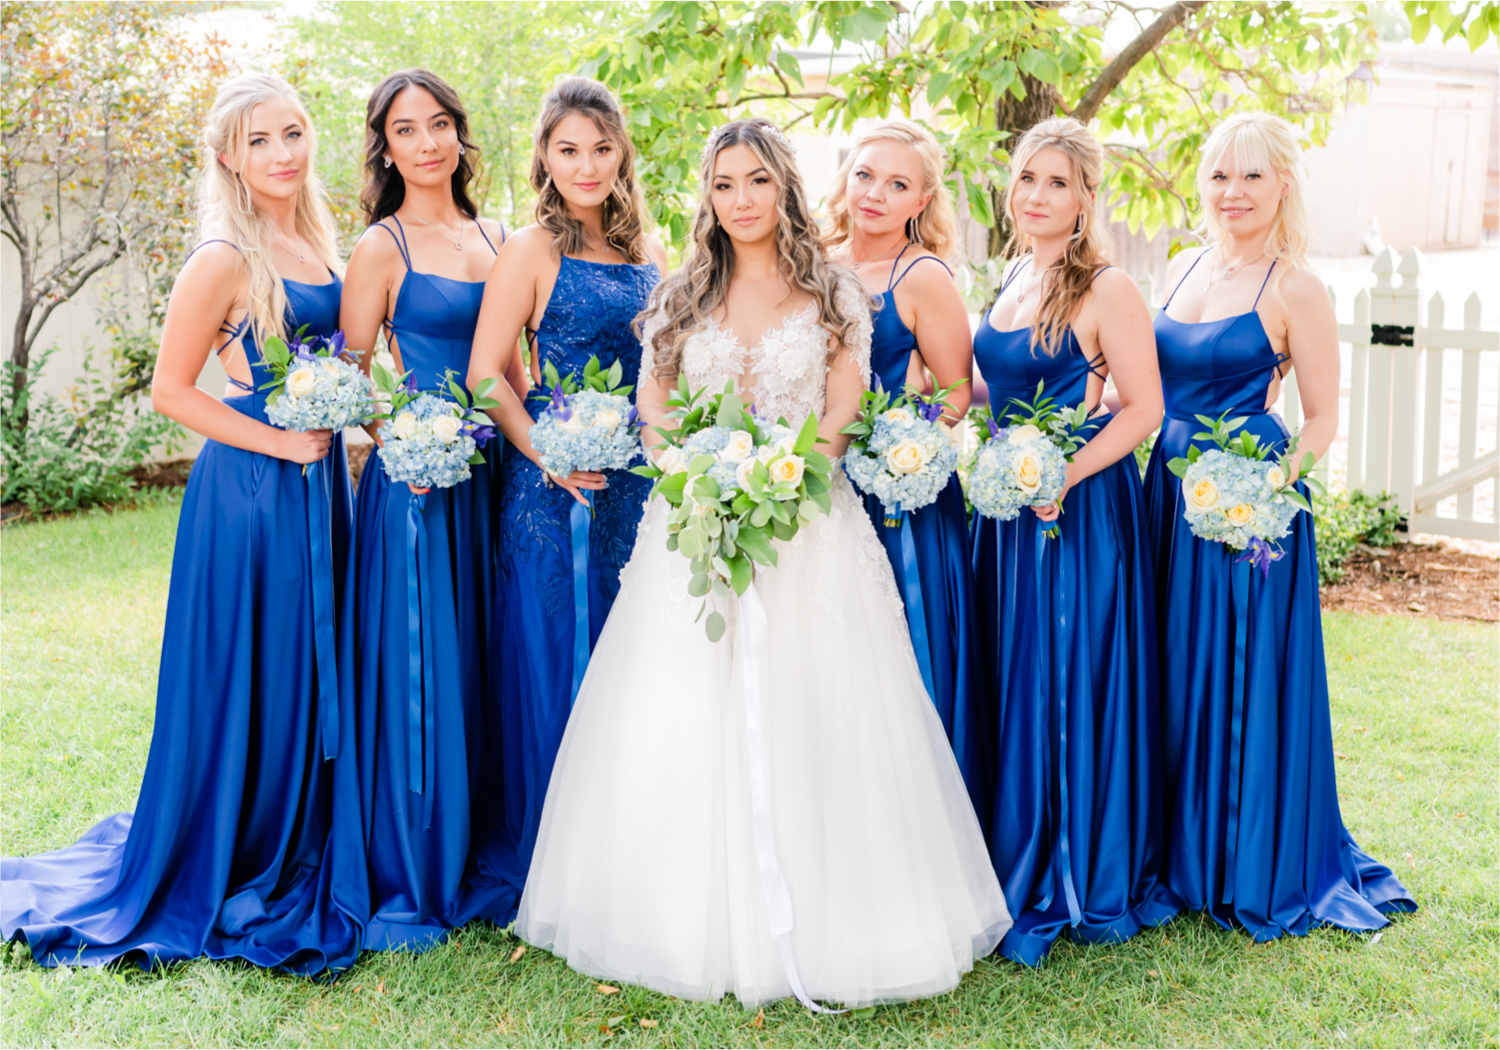 Romantic and Rustic Wedding at The Mill in Windsor | Britni Girard Photography | Colorado based wedding photography and videography team | Bride Portraits | Bride's Dress from Madeira Wedding in Kiev Ukraine | Portraits at Eastman Park | Royal Blue and White Wedding